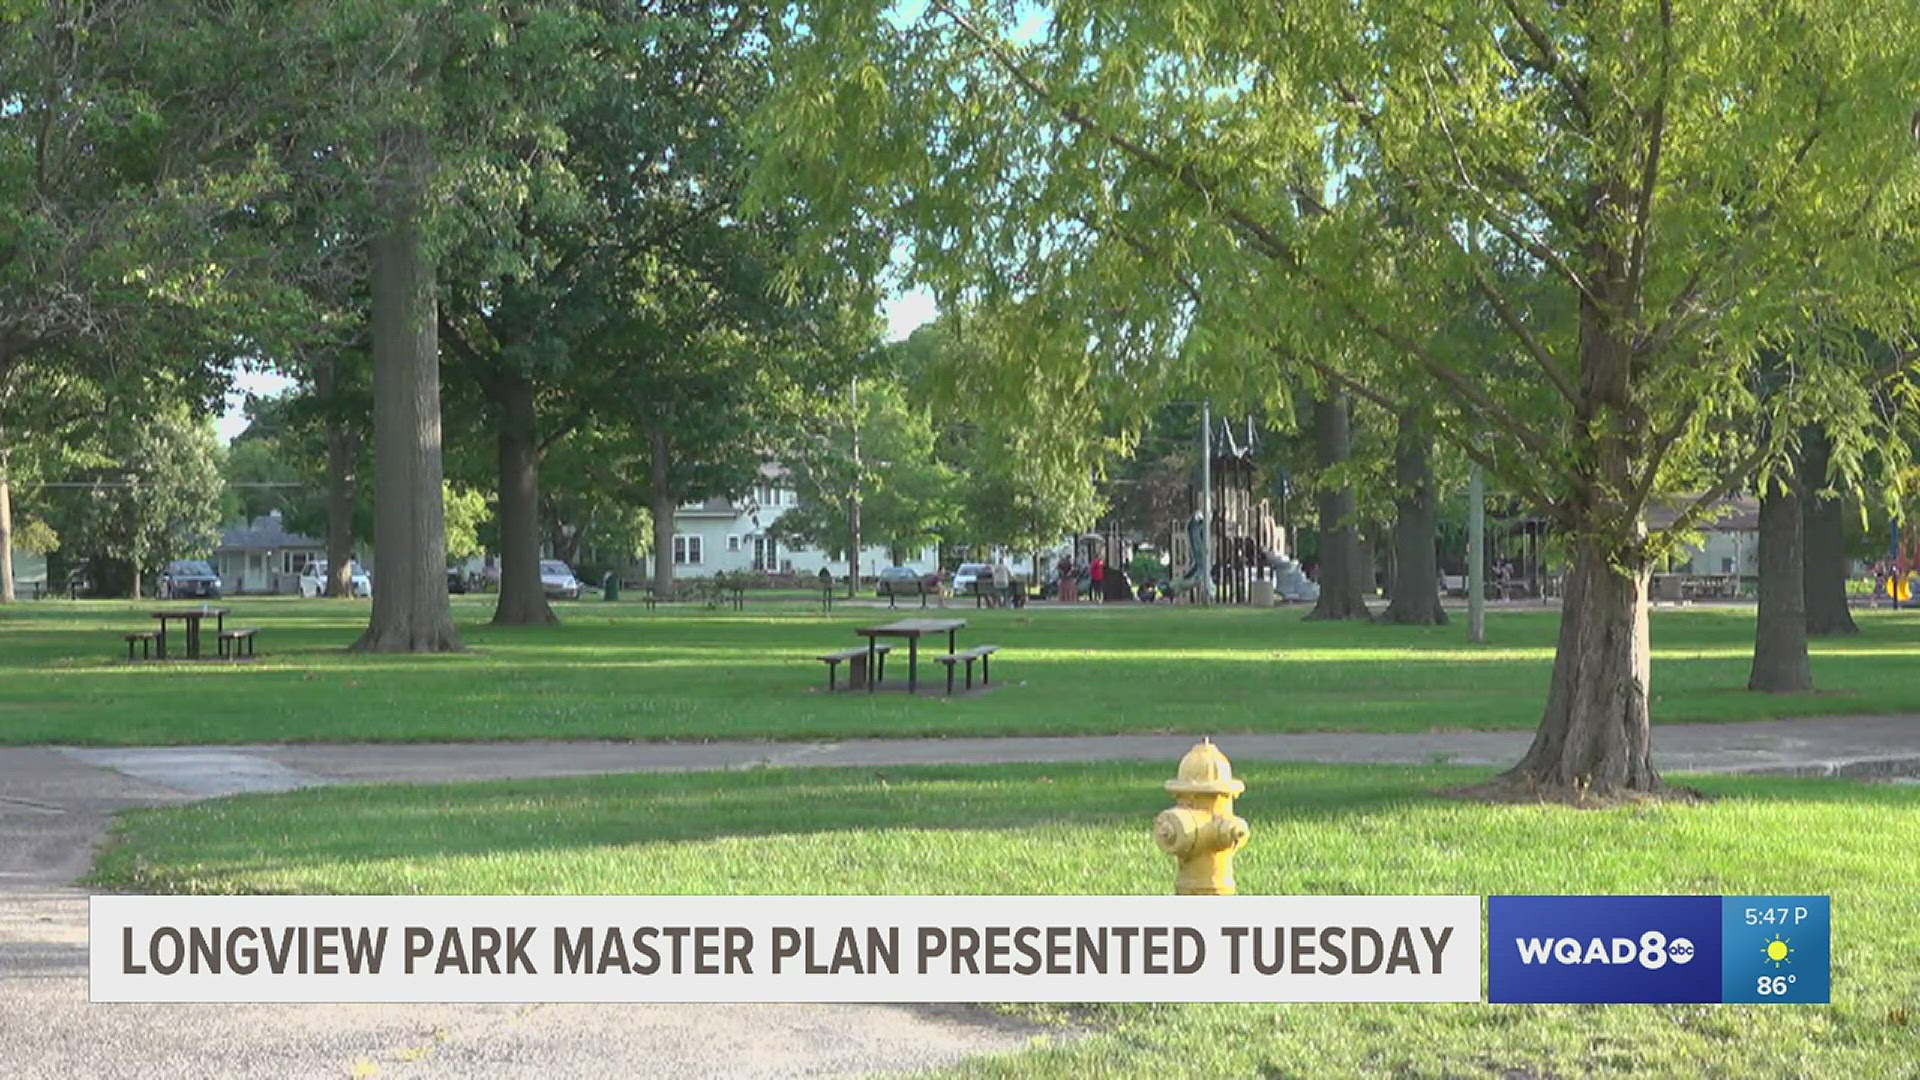 Augustana students will present their vision of Longview Park on Tuesday. Then on Wednesday, the City will celebrate renovations at Douglas Park.